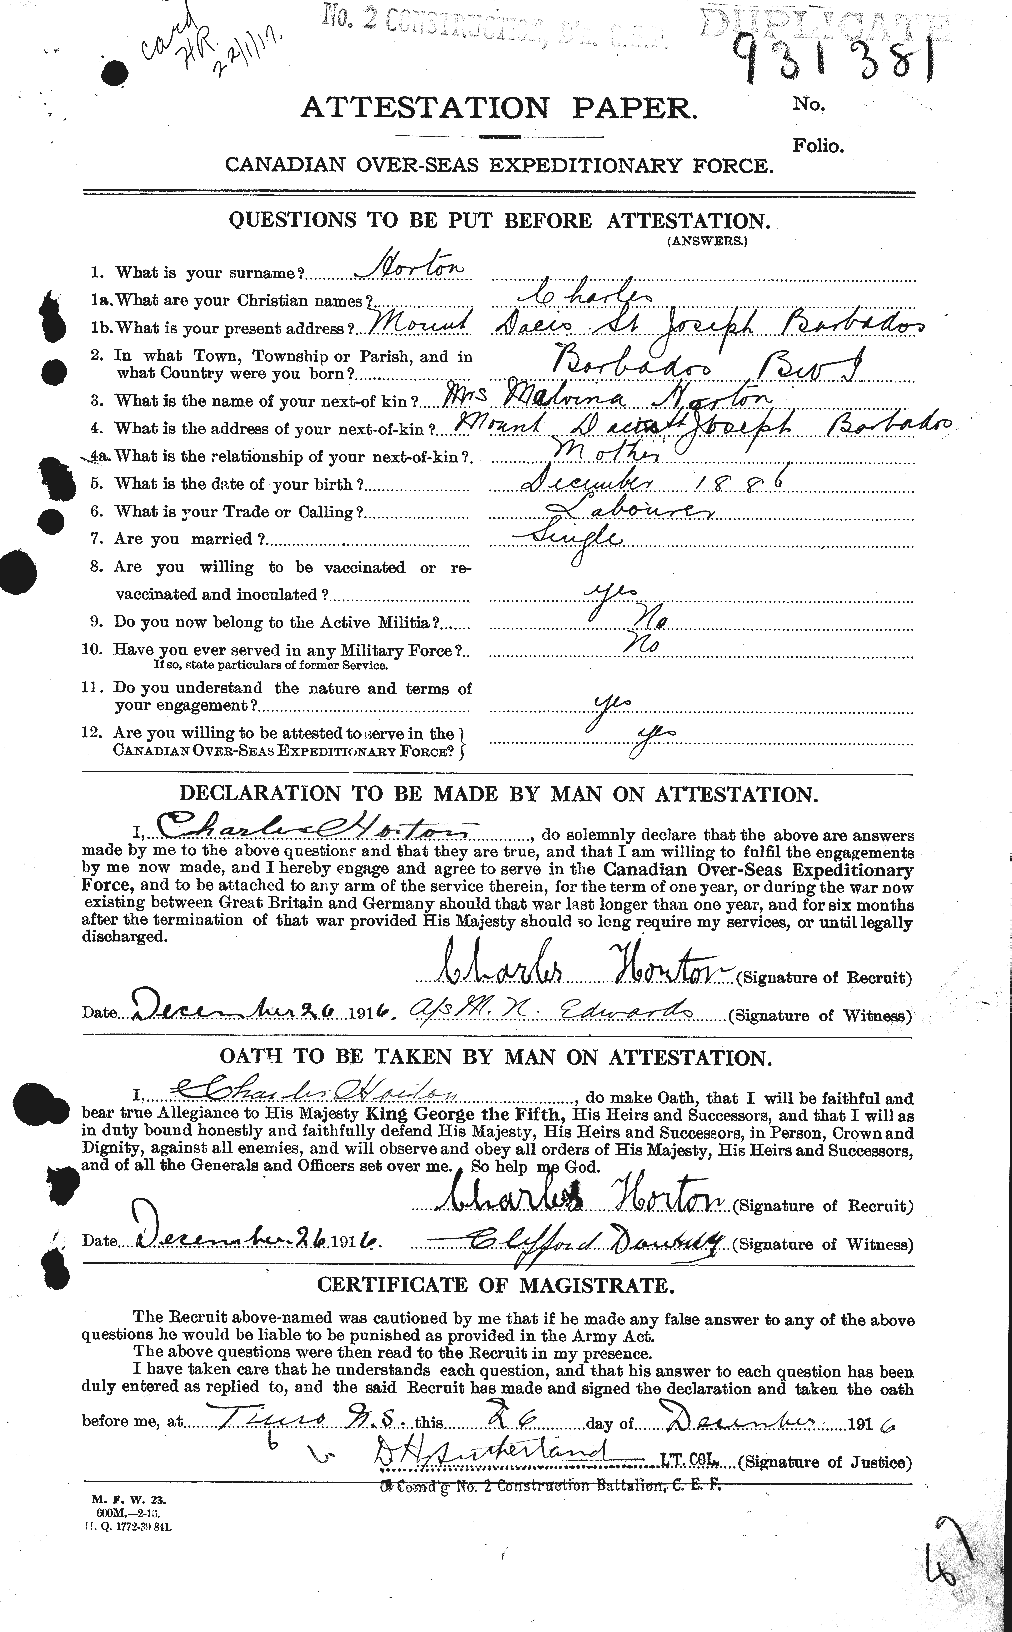 Personnel Records of the First World War - CEF 399824a